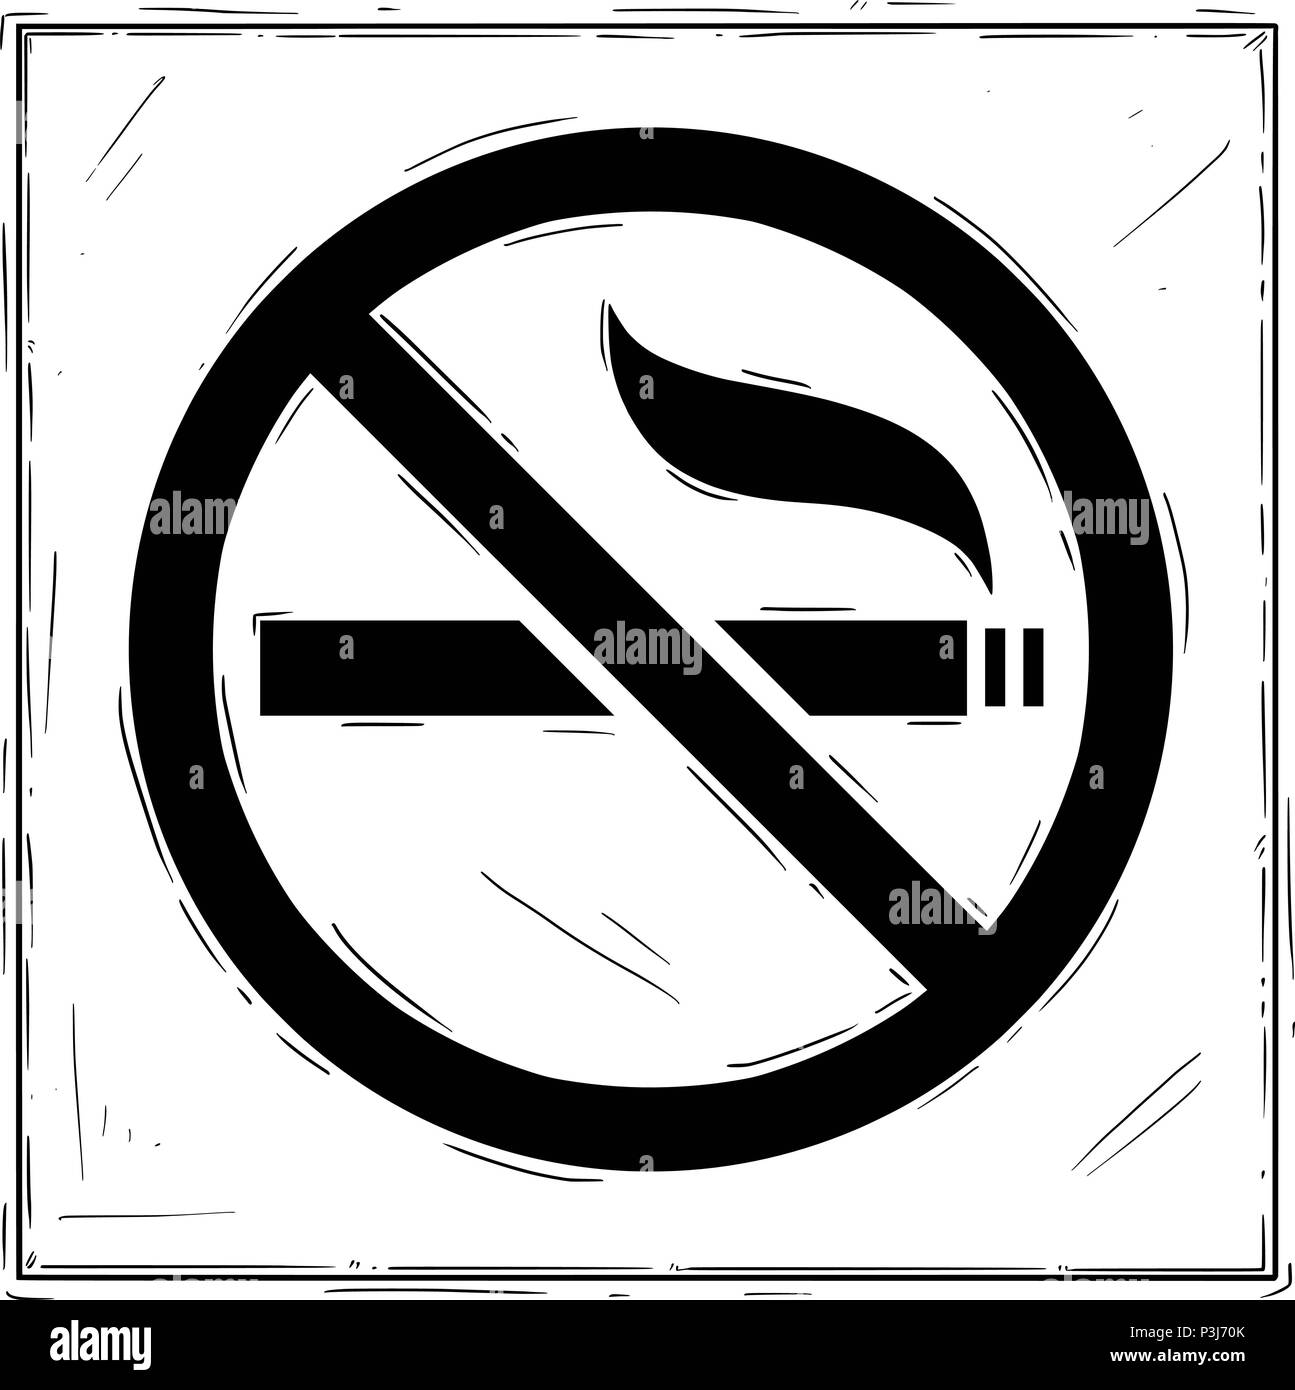 World No Tobacco (No Smoking) Day Drawing is Very Easy : r/drawing